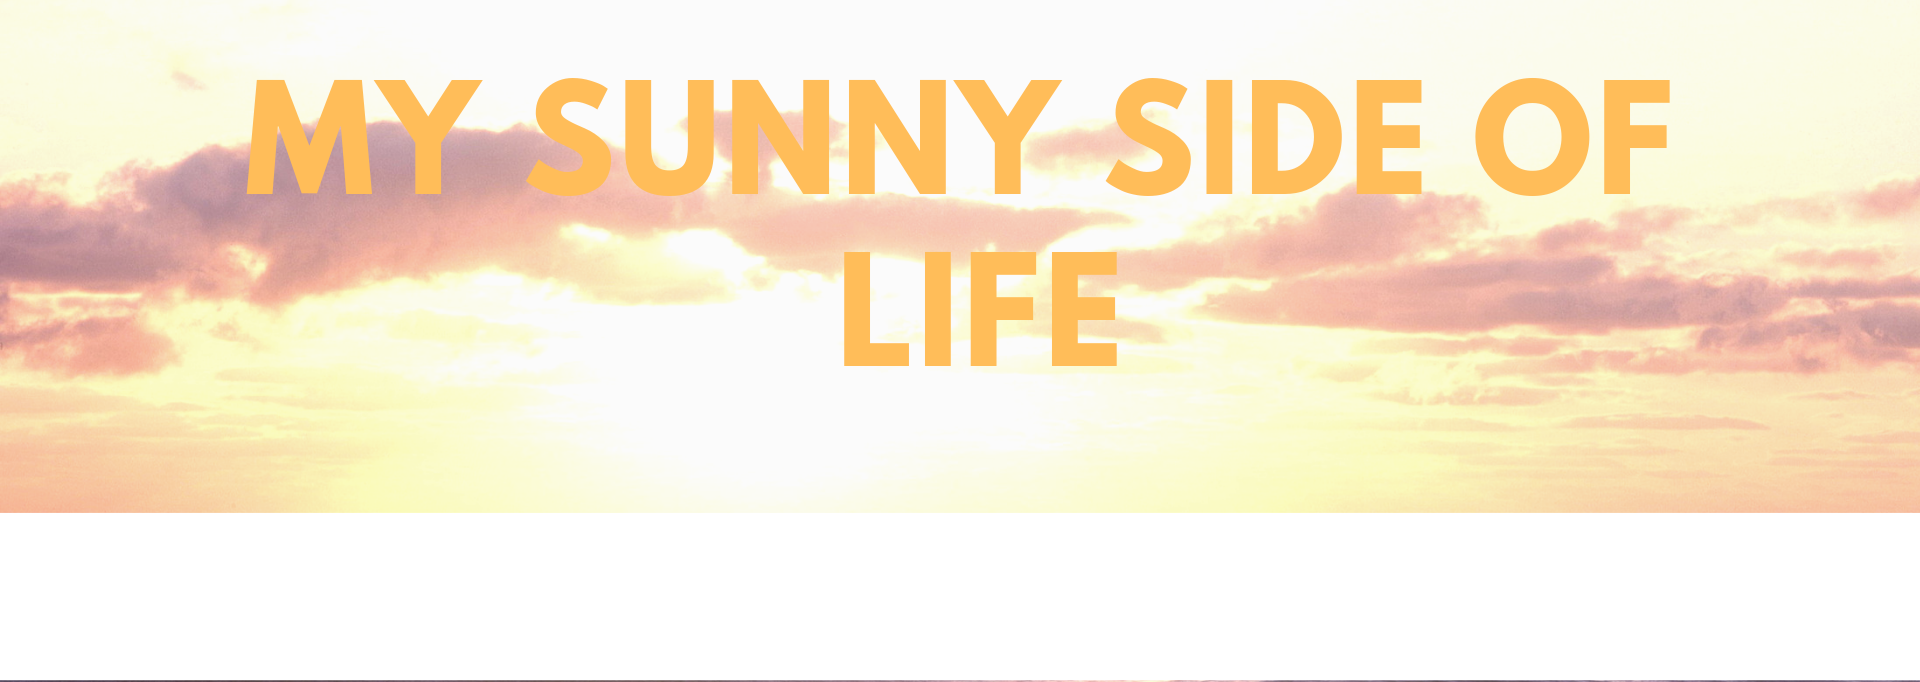 MY SUNNY SIDE OF LIFE